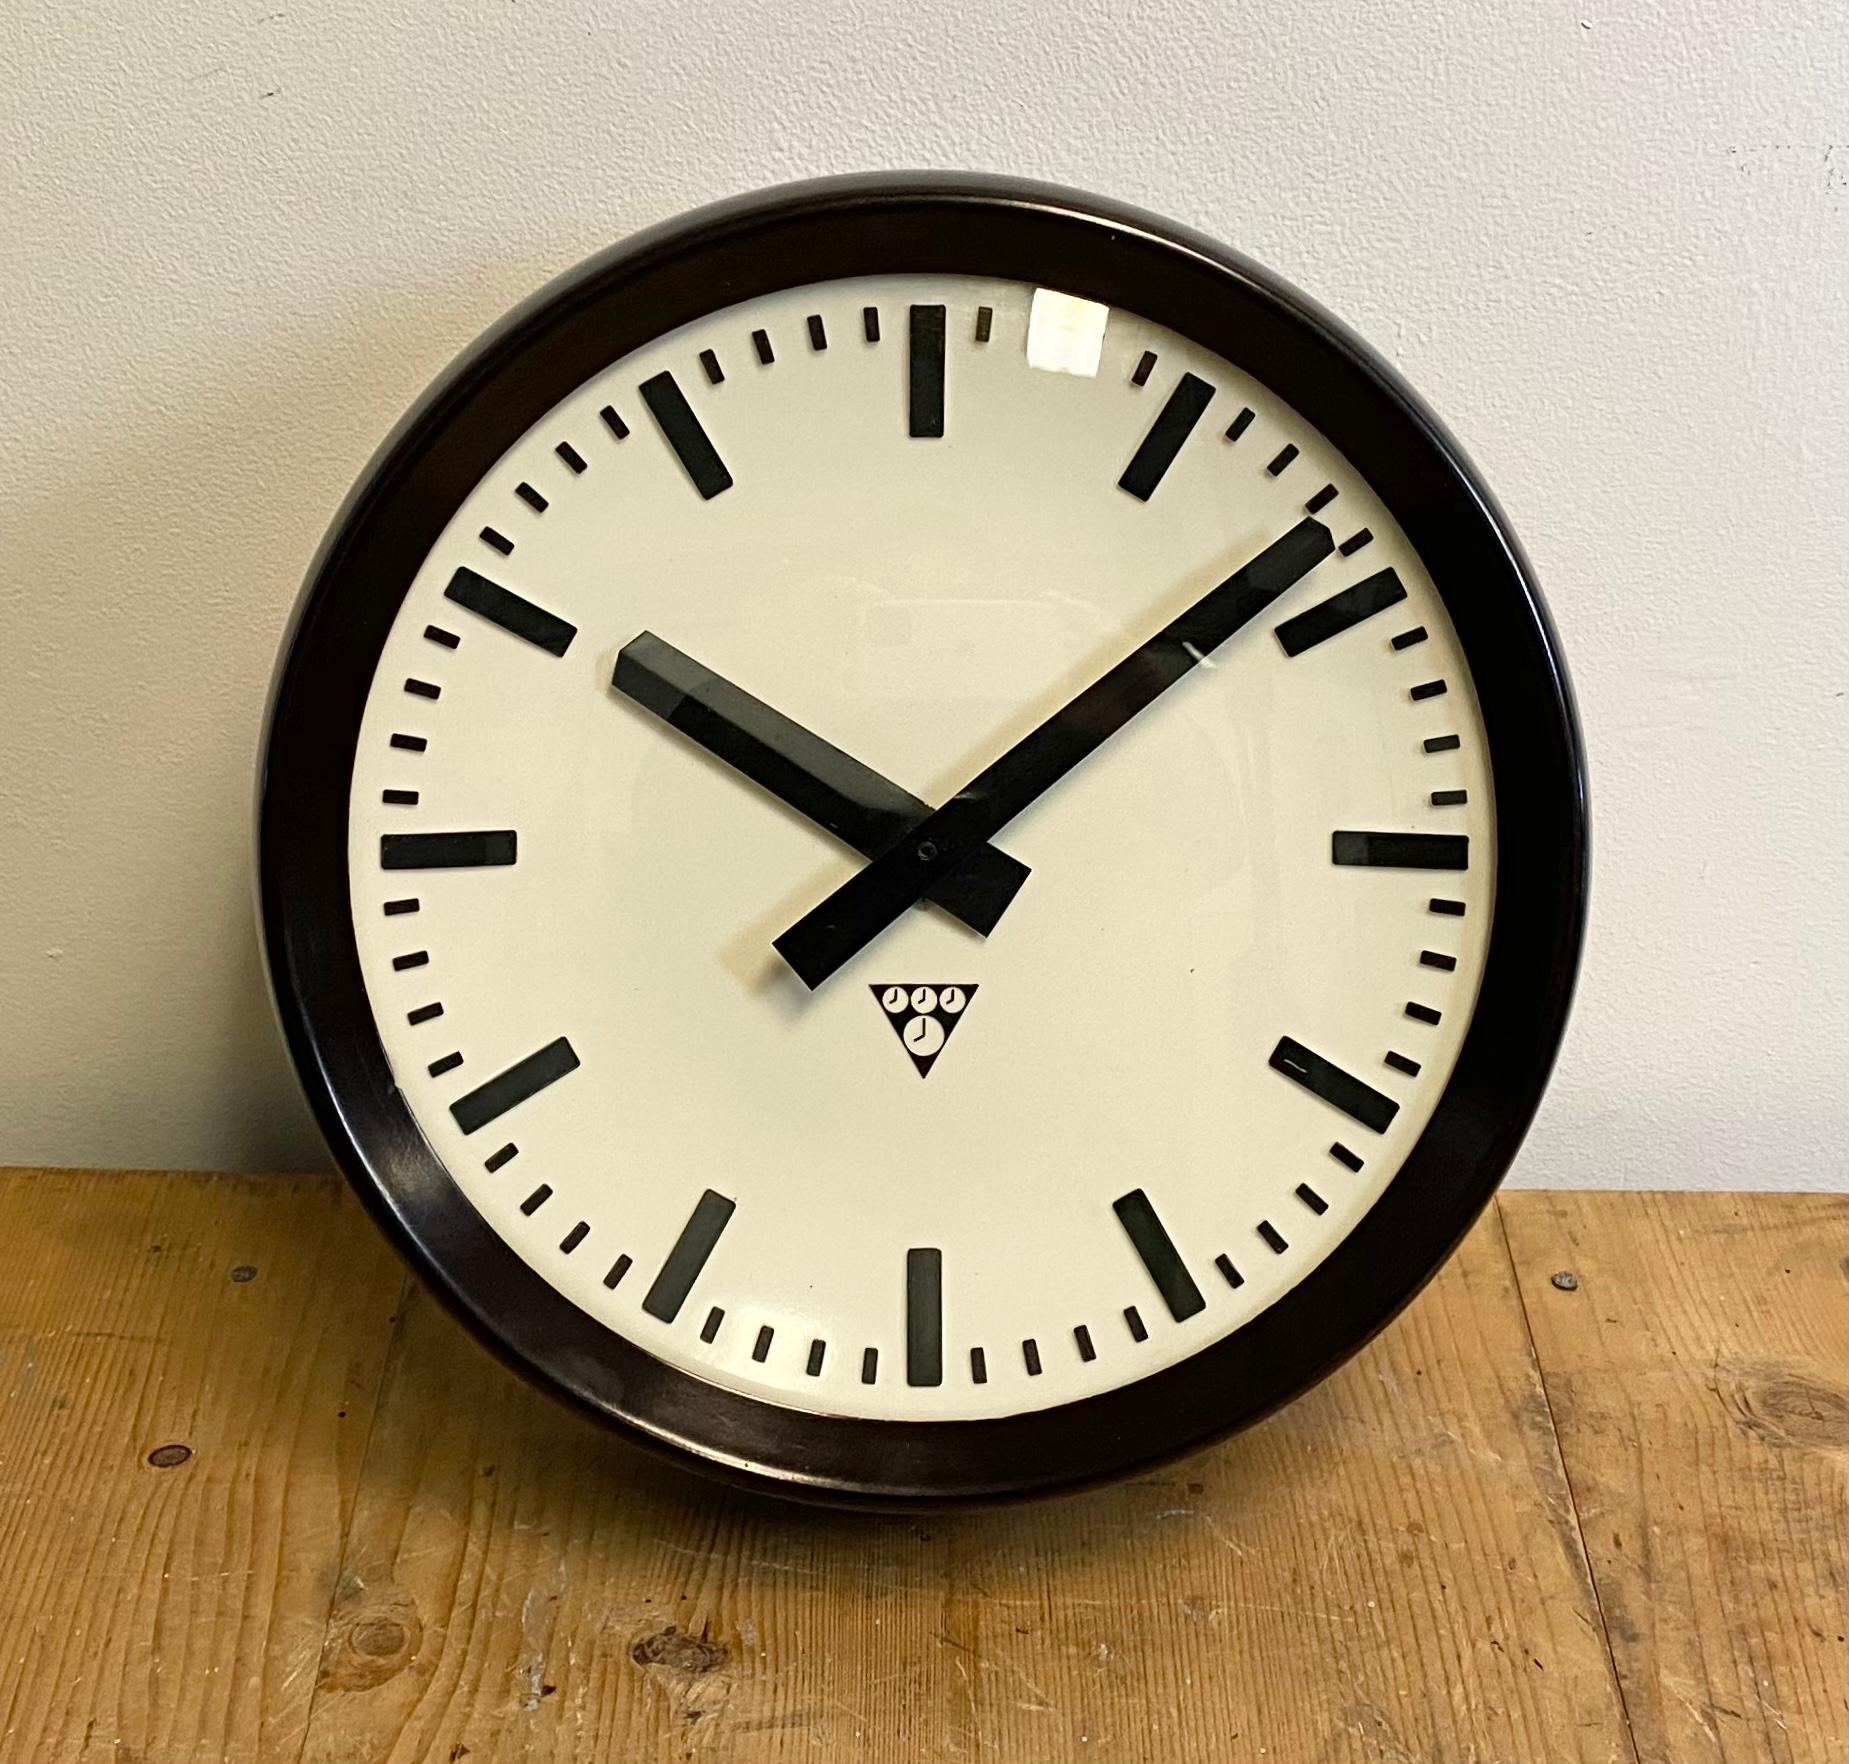 This wall clock was produced by Pragotron in former Czechoslovakia during the 1960s. The piece features a brown Bakelite frame, white Bakelite dial, aluminum hands and a curved clear glass cover. The piece has been converted into a battery-powered